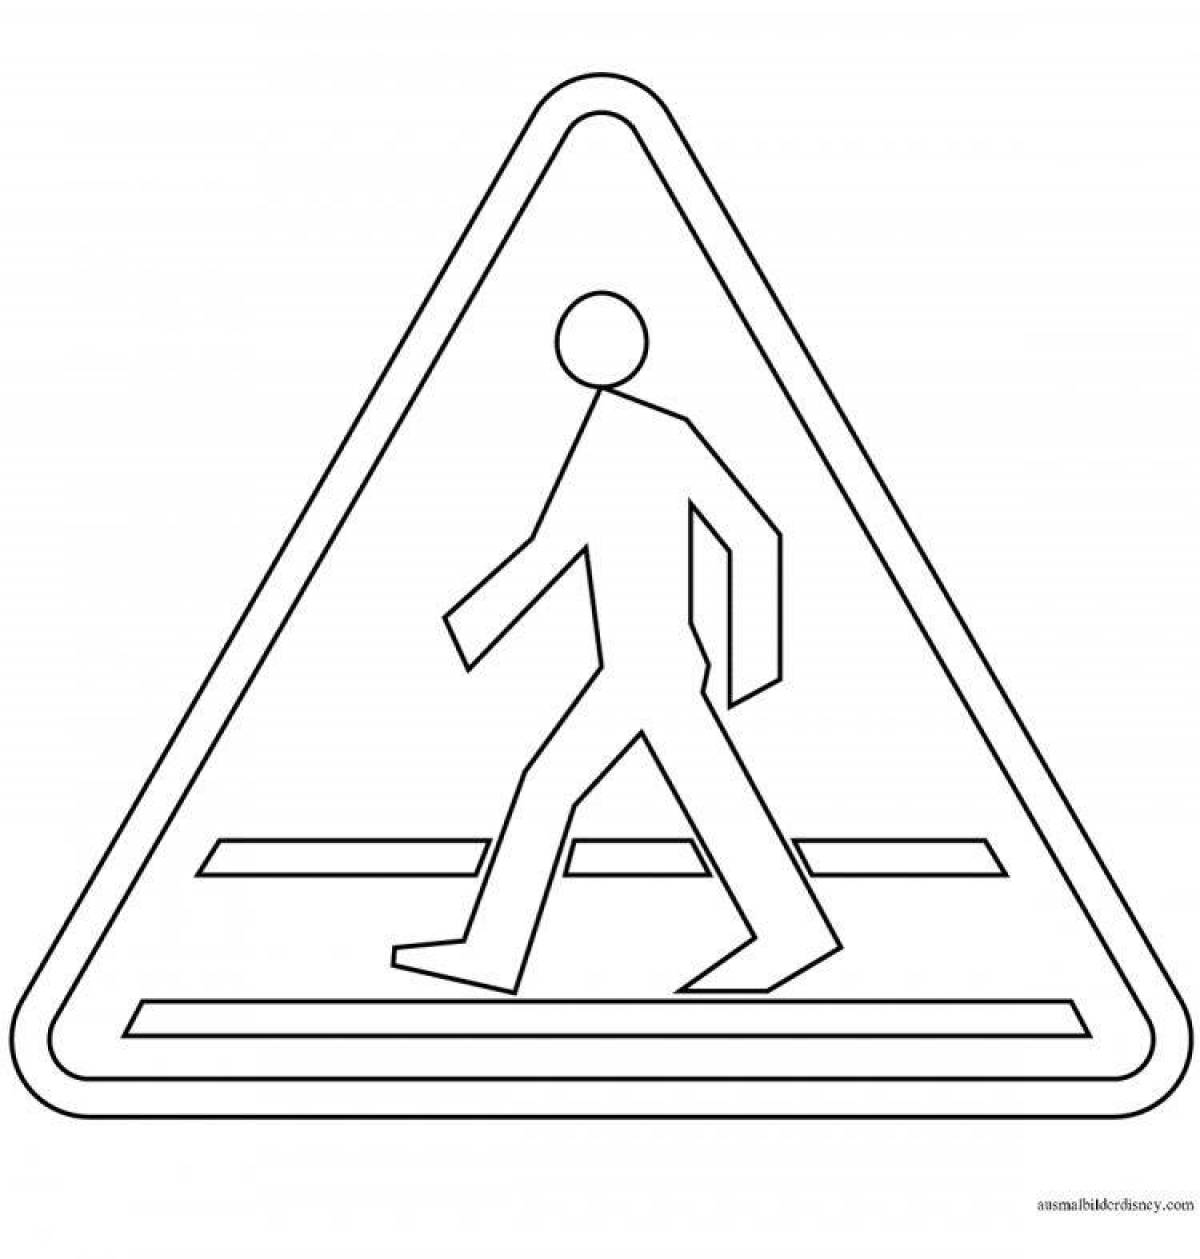 Exciting walking path coloring page